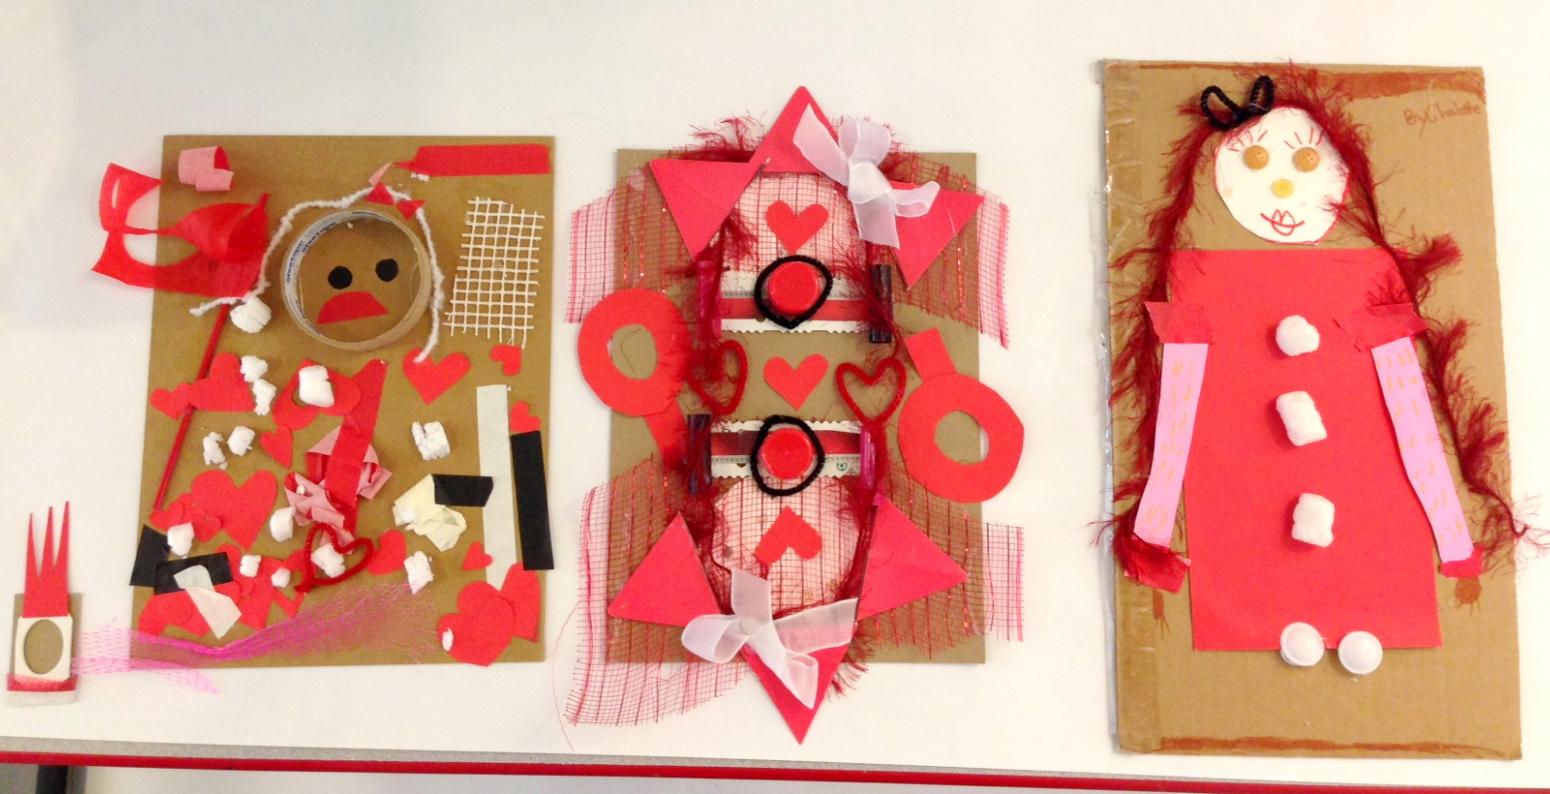 Four found material sculptures made from red, white, and black supplies on cardboard bases.